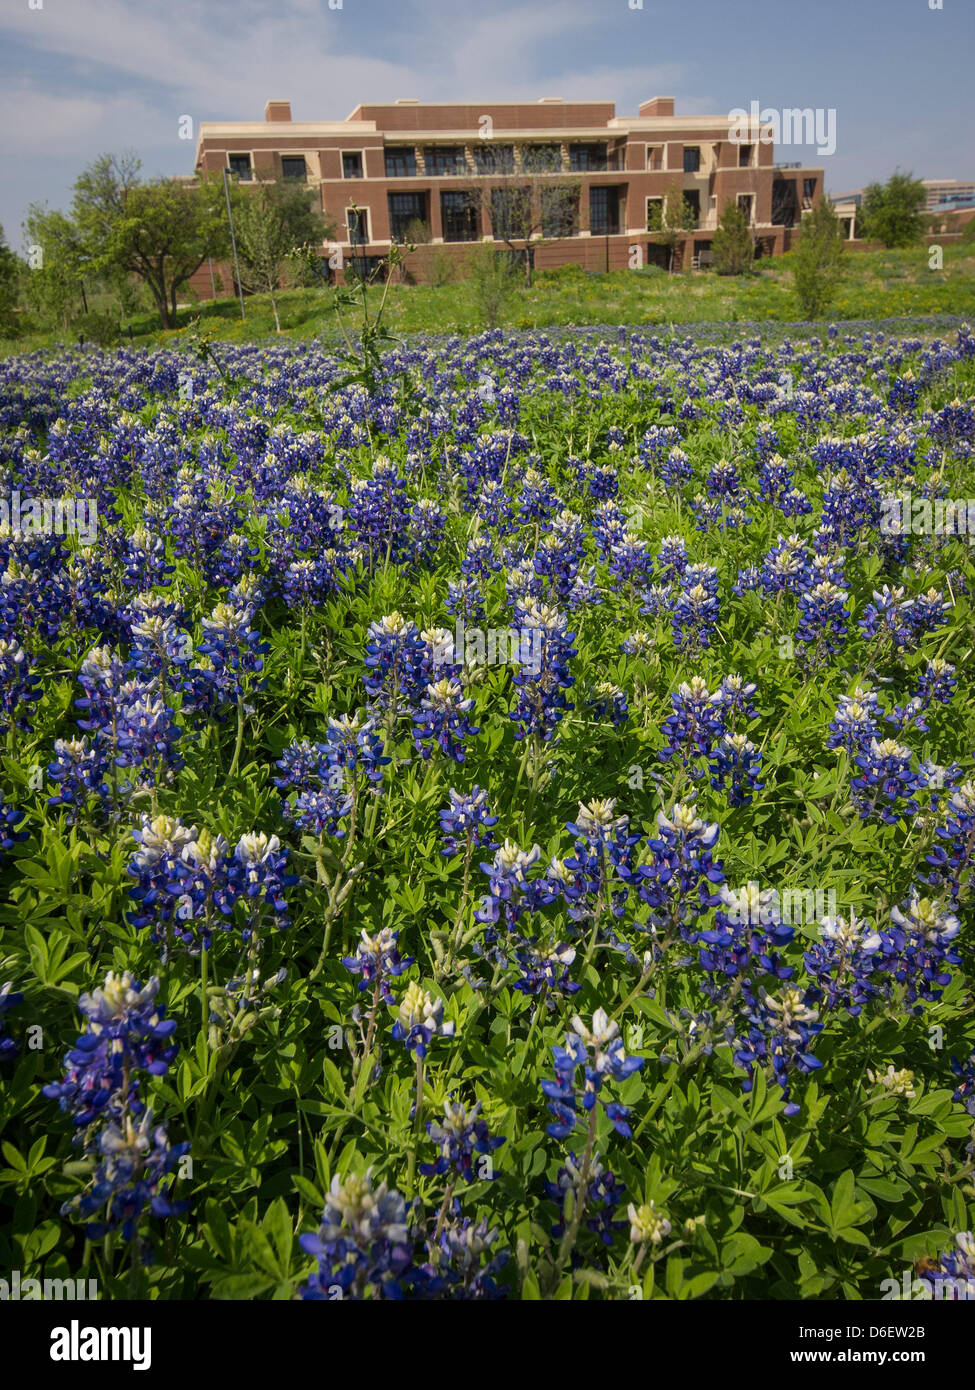 Texas state flower the Bluebonnet blooms at the George W. Bush Presidential Library and Museum on the Southern Methodist University campus, alma mater of Mrs. Laura Bush. Stock Photo